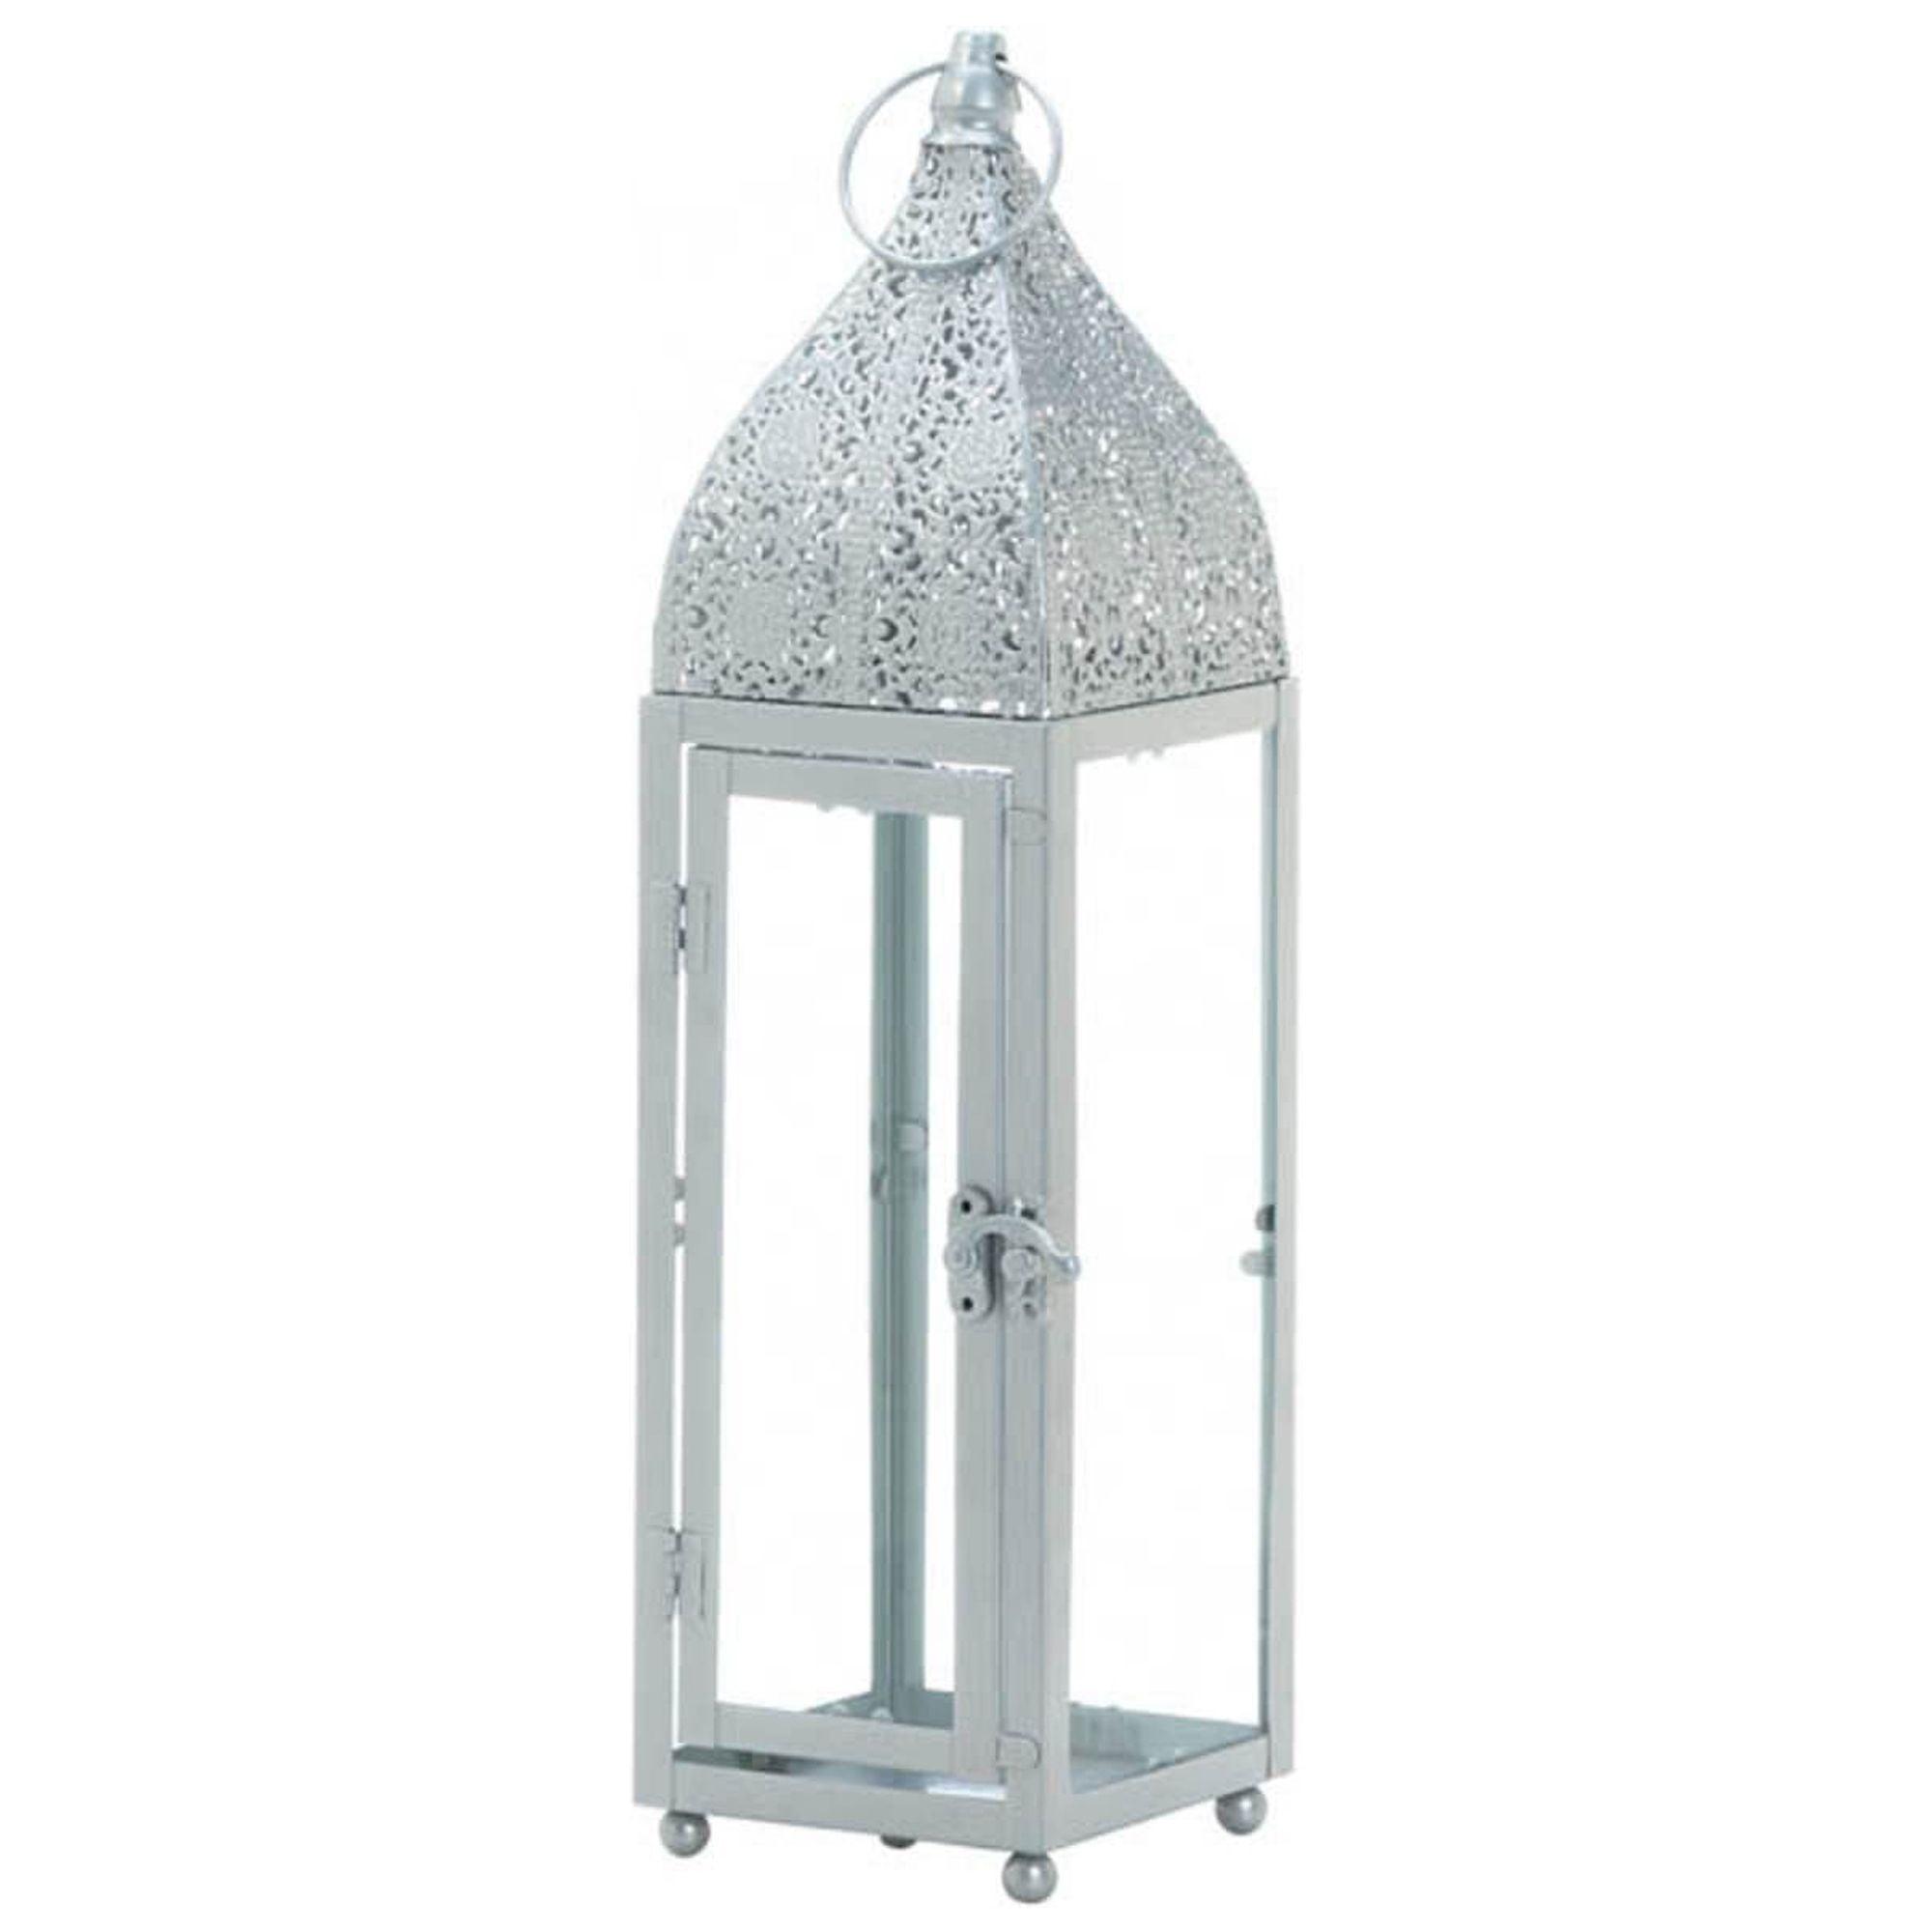 Elegant Silver Moroccan-Style 16" Tabletop & Hanging Candle Lantern